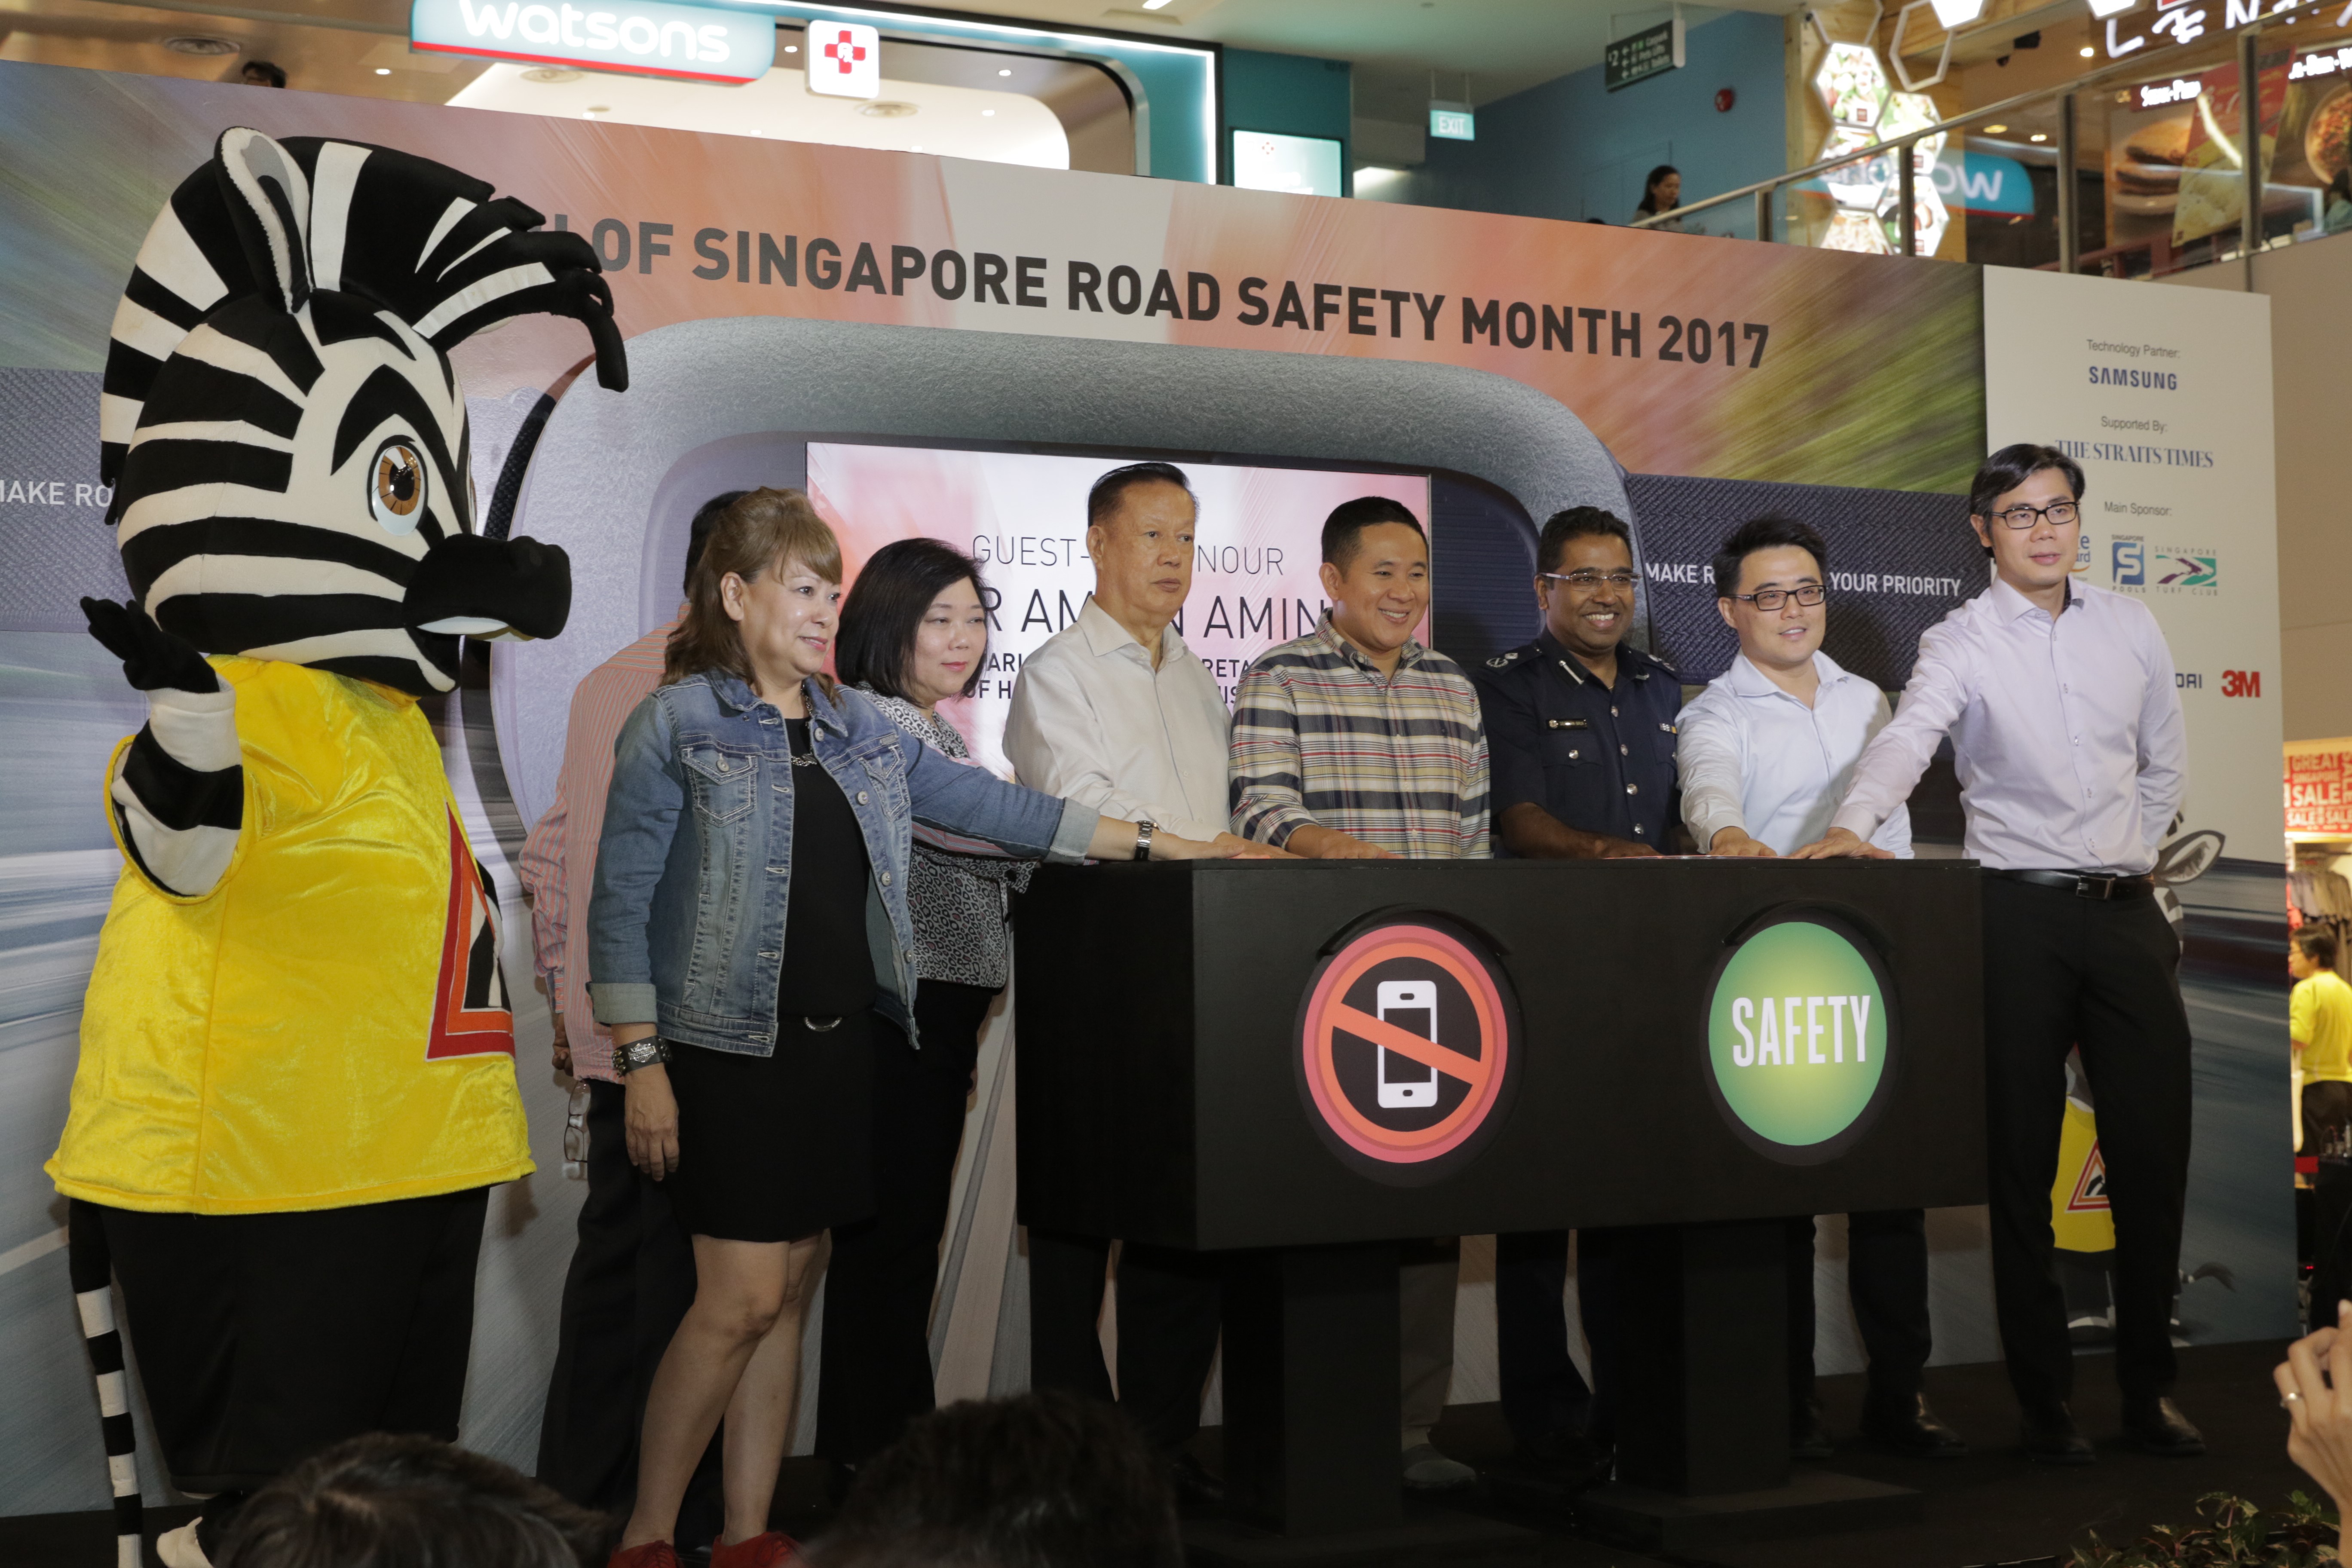 20170526_others_singapore_road_safety_month_2017